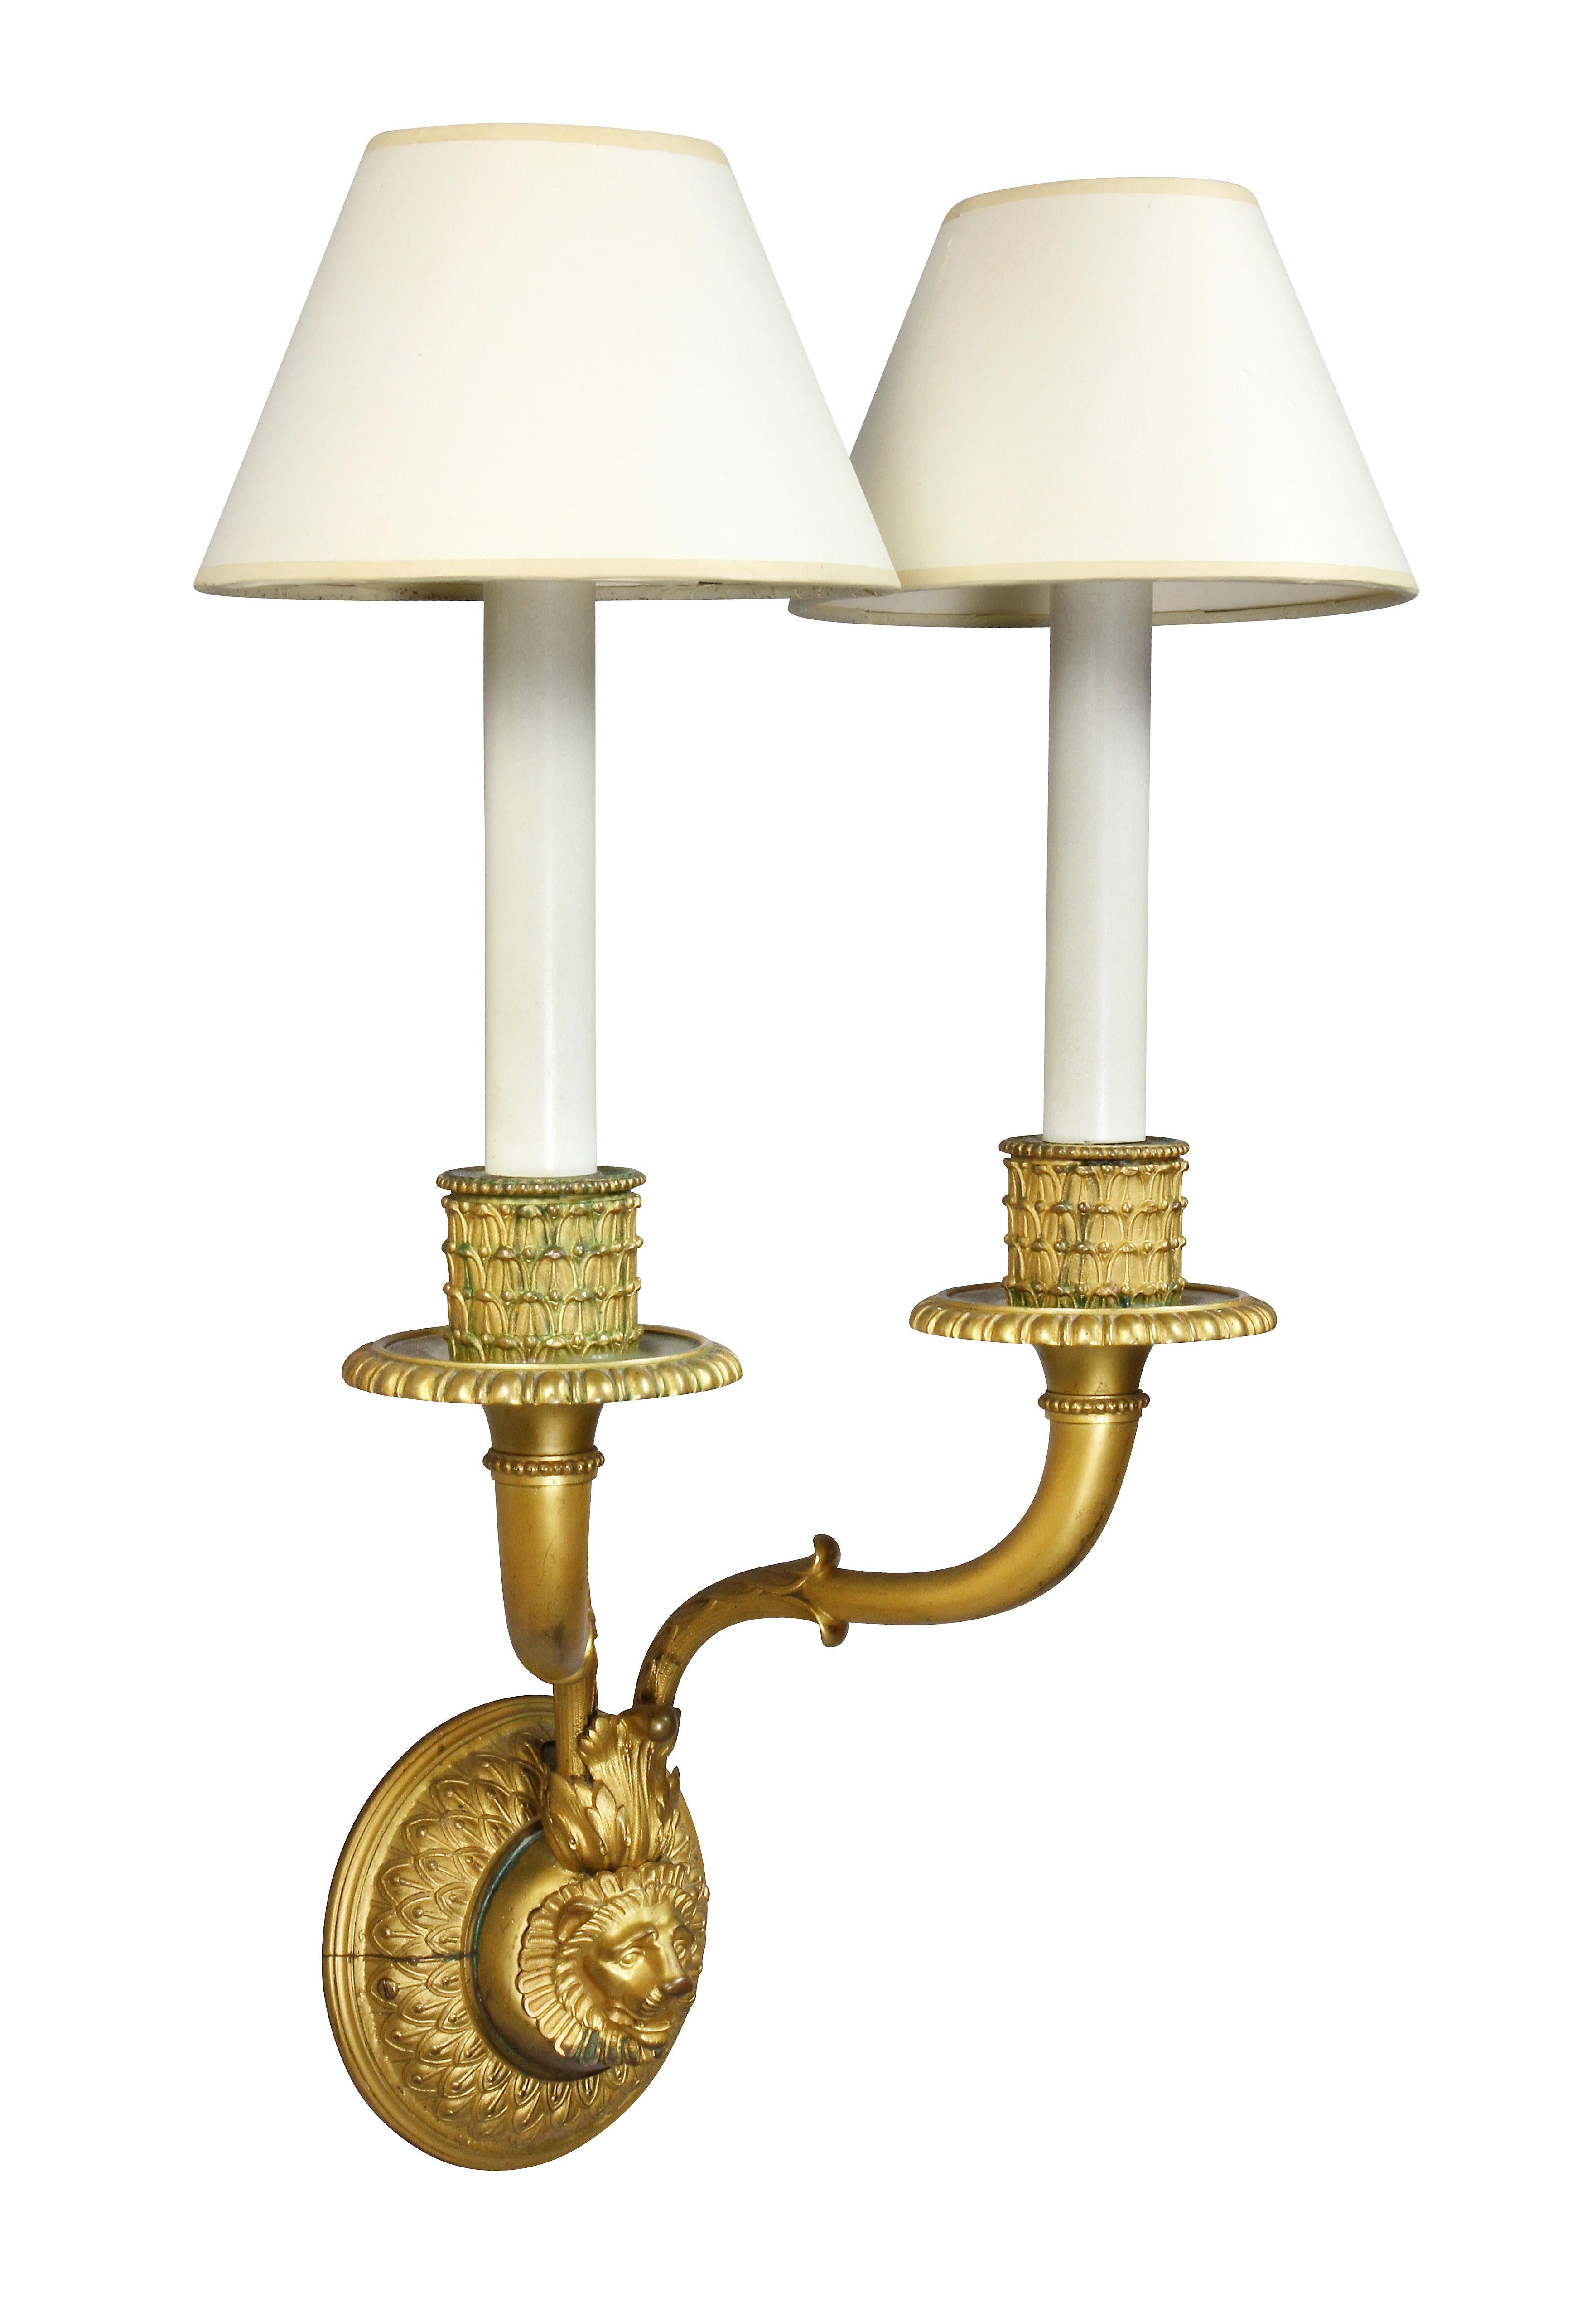 Neoclassical Pair of Neoclassic Style Gilt Bronze Wall Lights